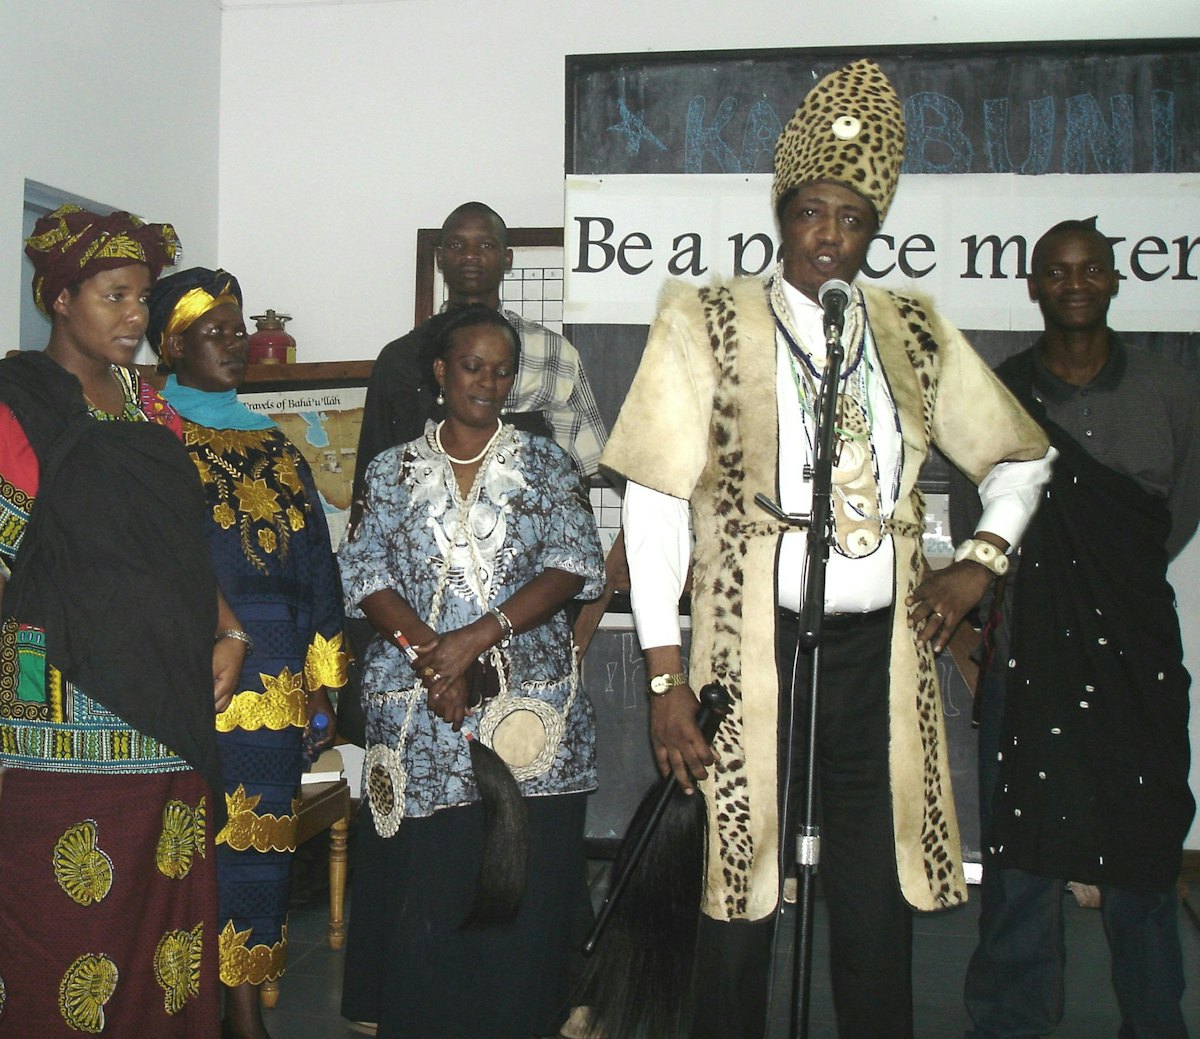 Chief Matange (second from right) and other members of an African traditional religion during prayers at the International Day of Peace gathering organized by the Baha'i community of Tanzania.